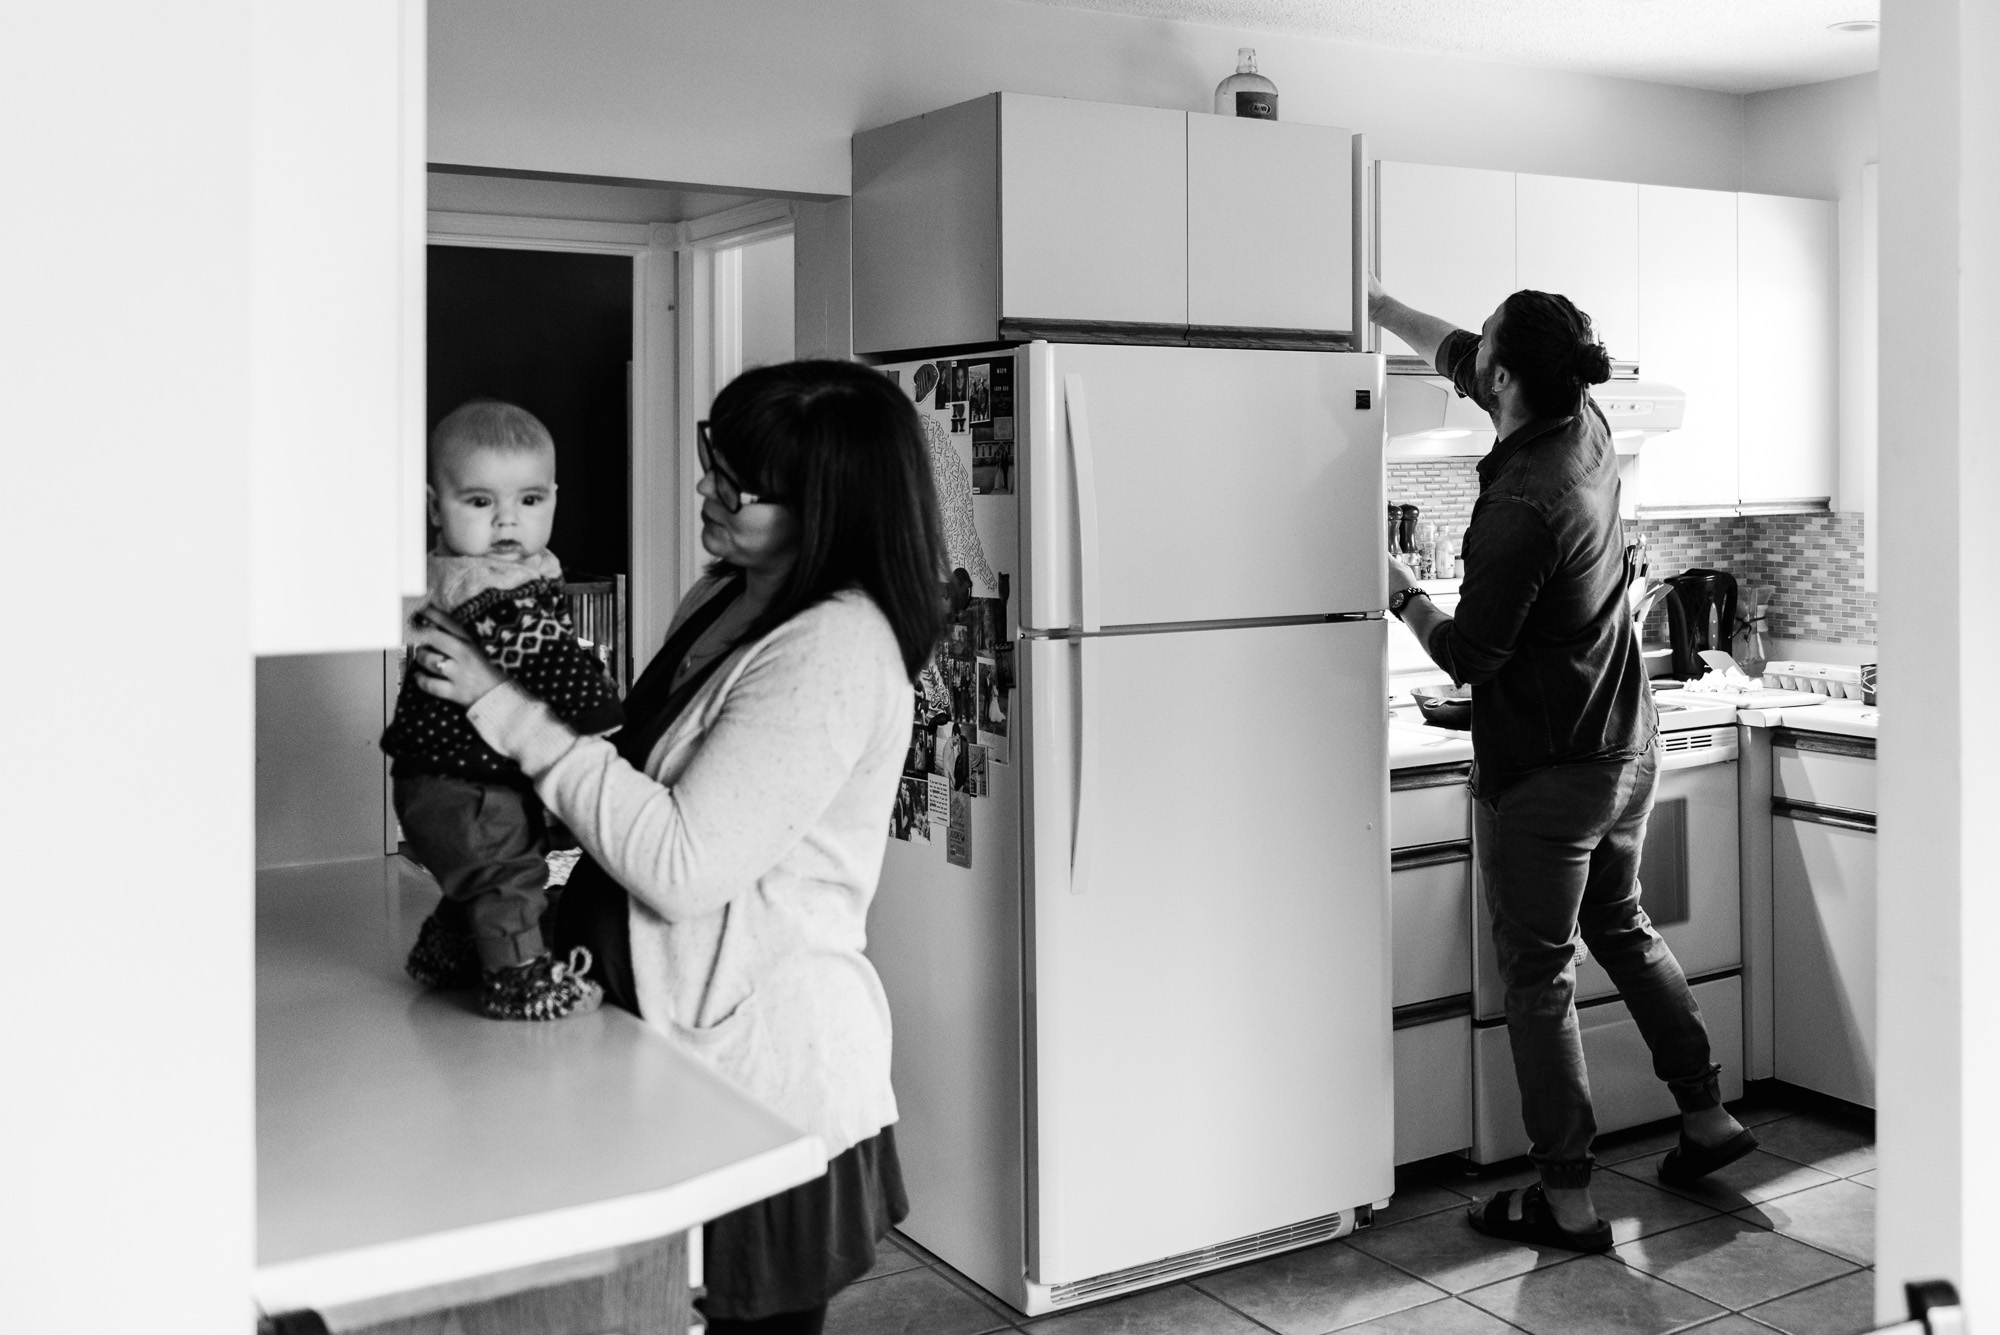 A family spends a weekend morning together cooking breakfast in their Fort Saskatchewan home.